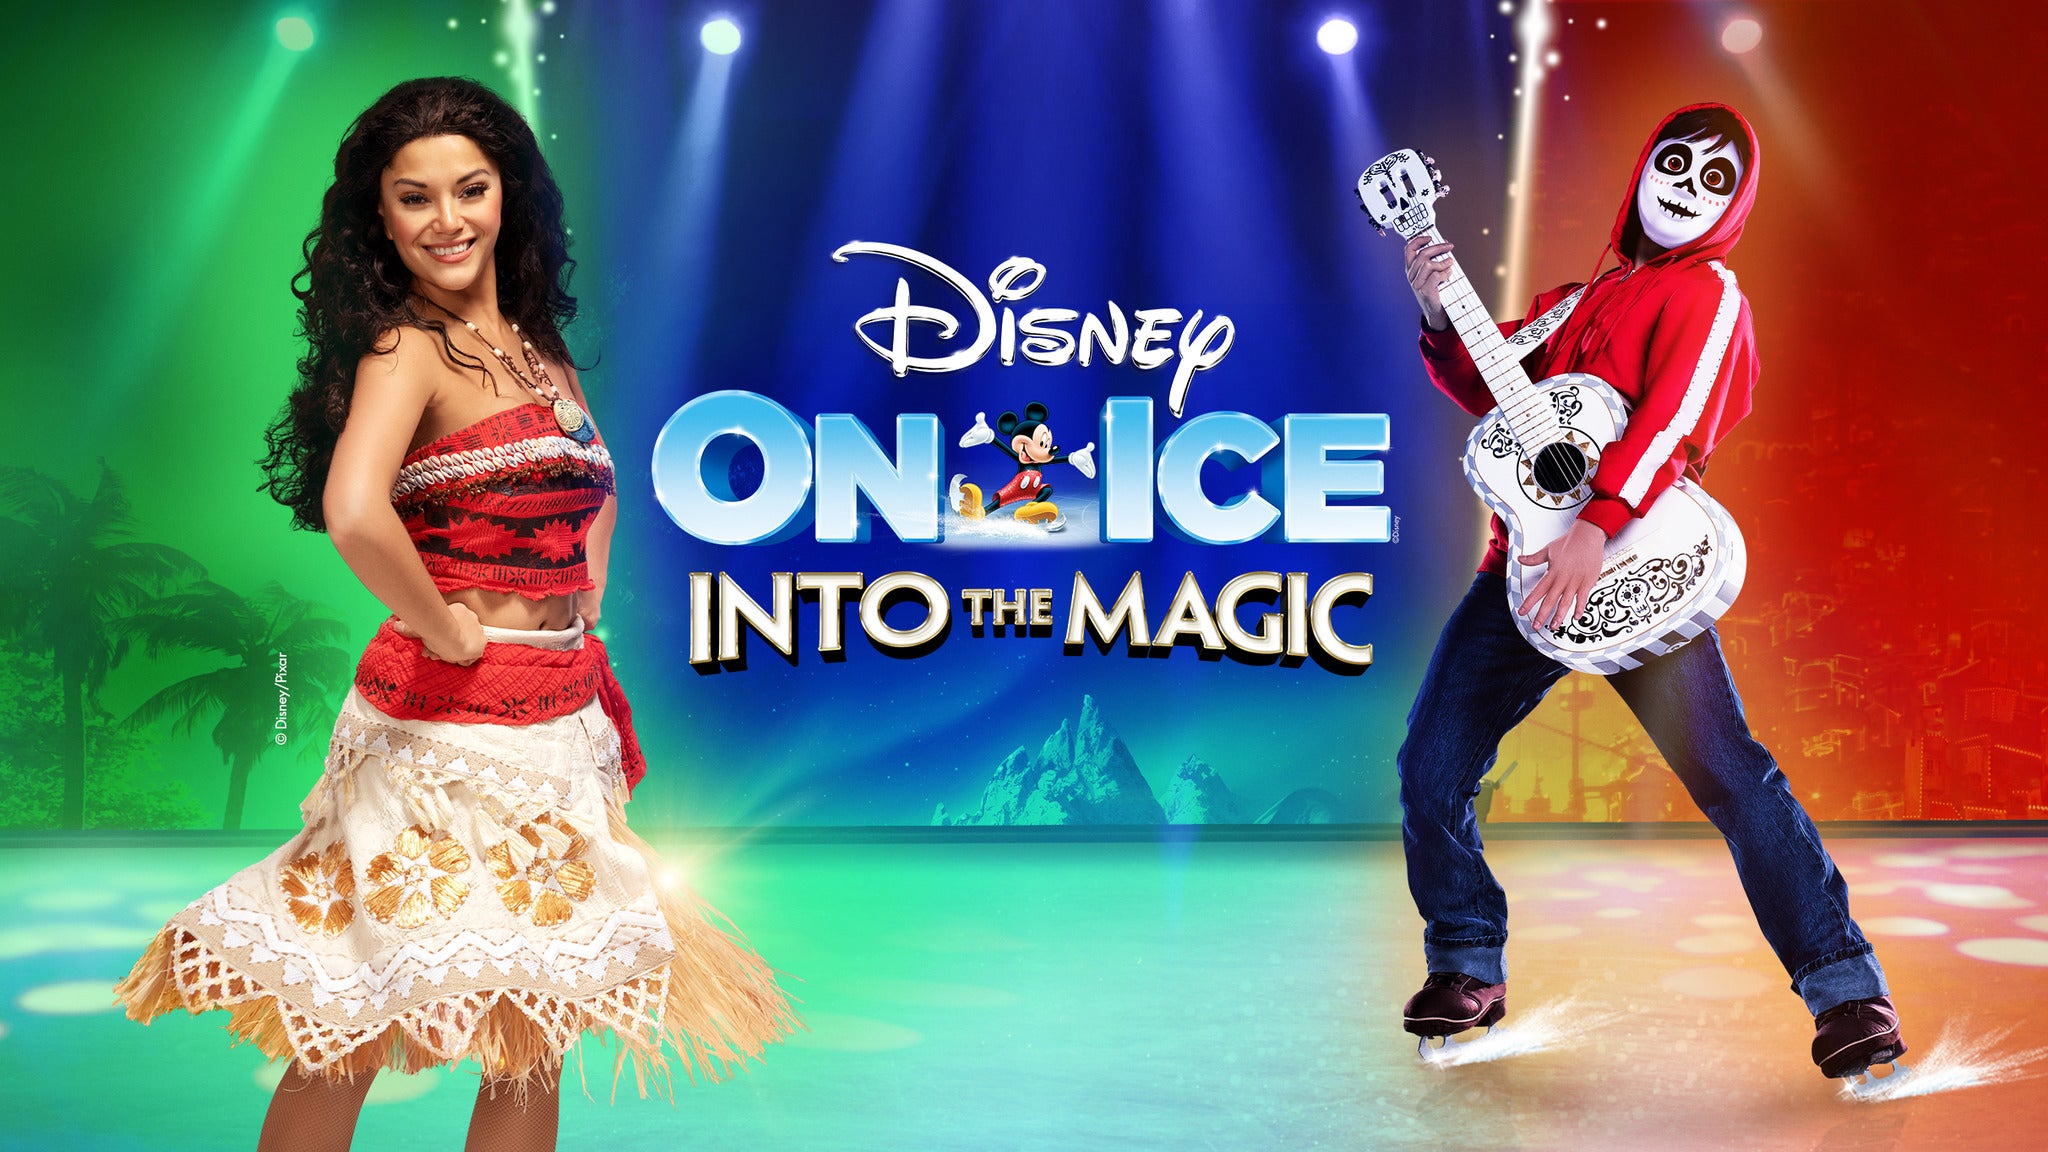 Disney On Ice presents Into the Magic in Lincoln event information